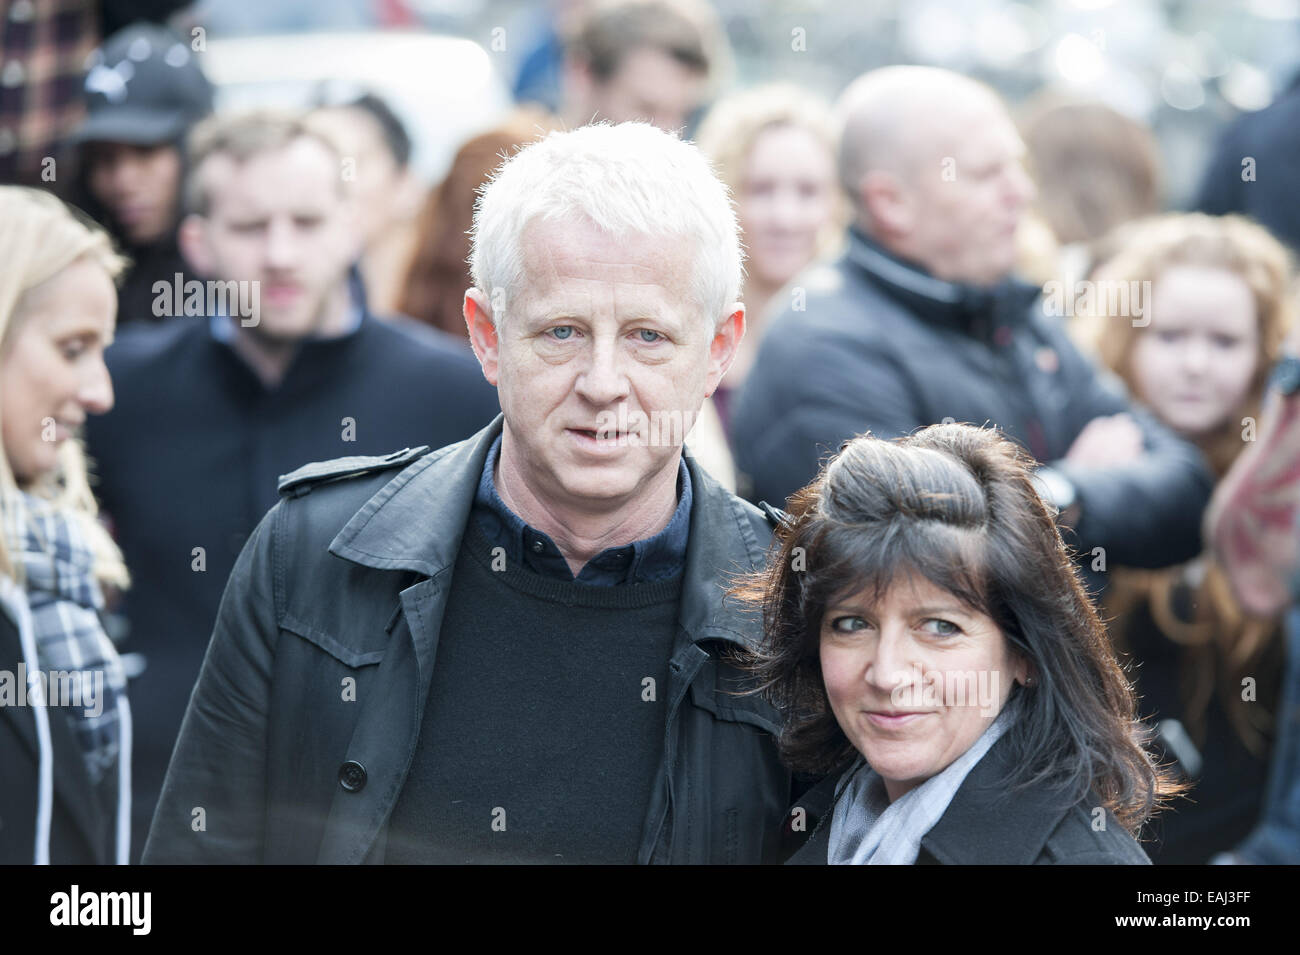 London, London, UK. 15th Nov, 2014. Artists arrive at Sarm Studios in Notting Hill, west London, to record Band Aid. Pictured: Richard Curtis and emma freud. © ZUMA Press, Inc./Alamy Live News Stock Photo